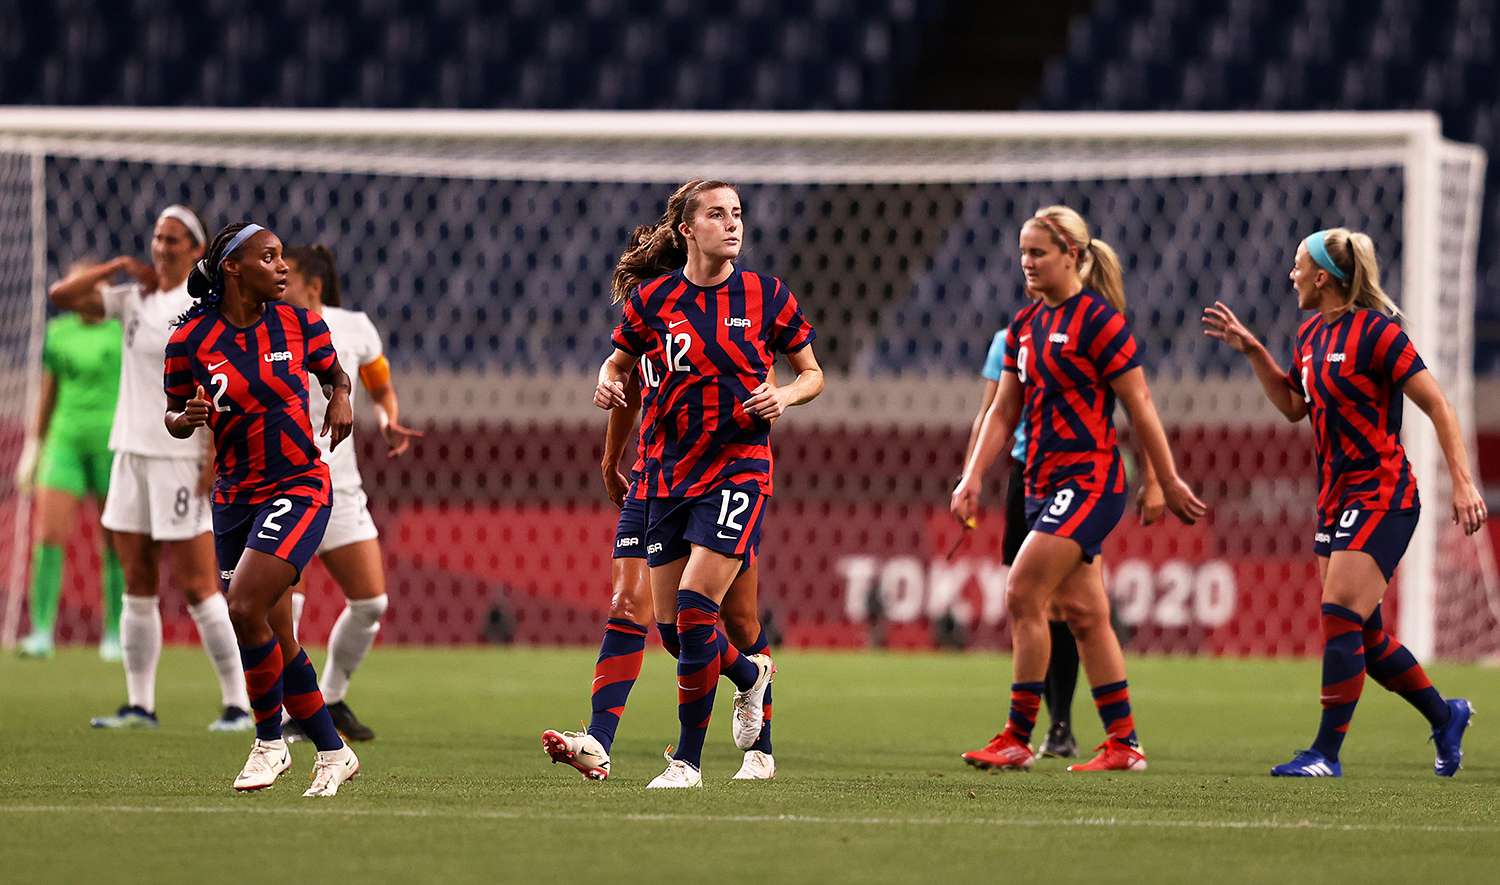 Tokyo Olympics Uswnt Defeats New Zealand For Team S First Win People Com